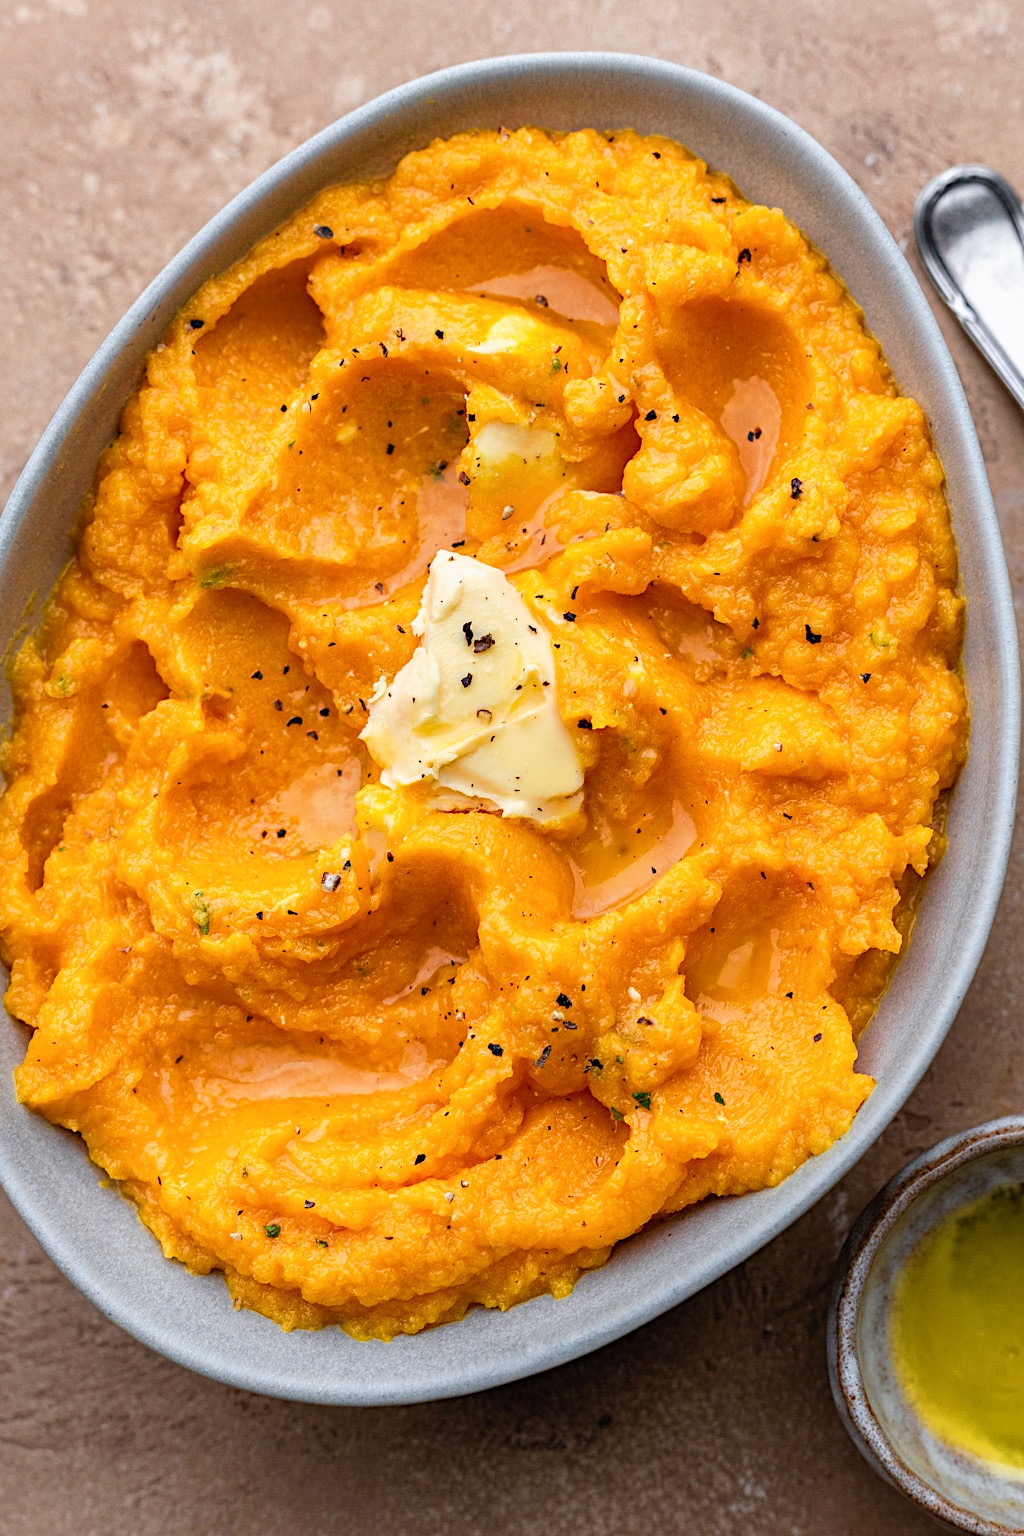 Carrot and Swede Mash #carrot #swede #mash